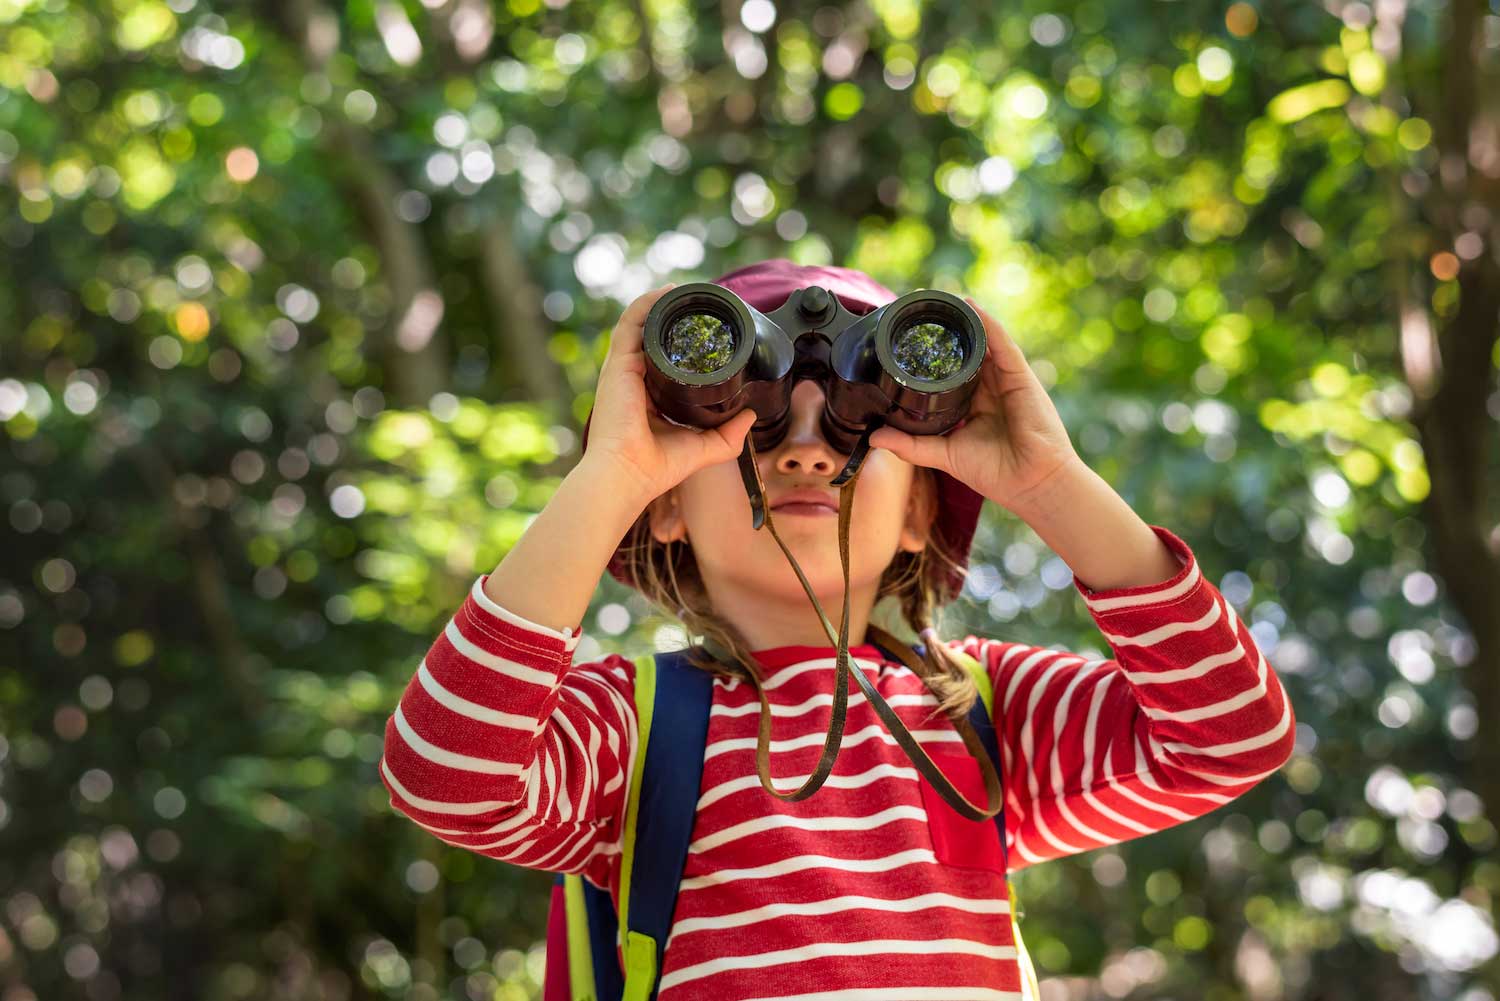 A child using binoculars to look at something in the distance.